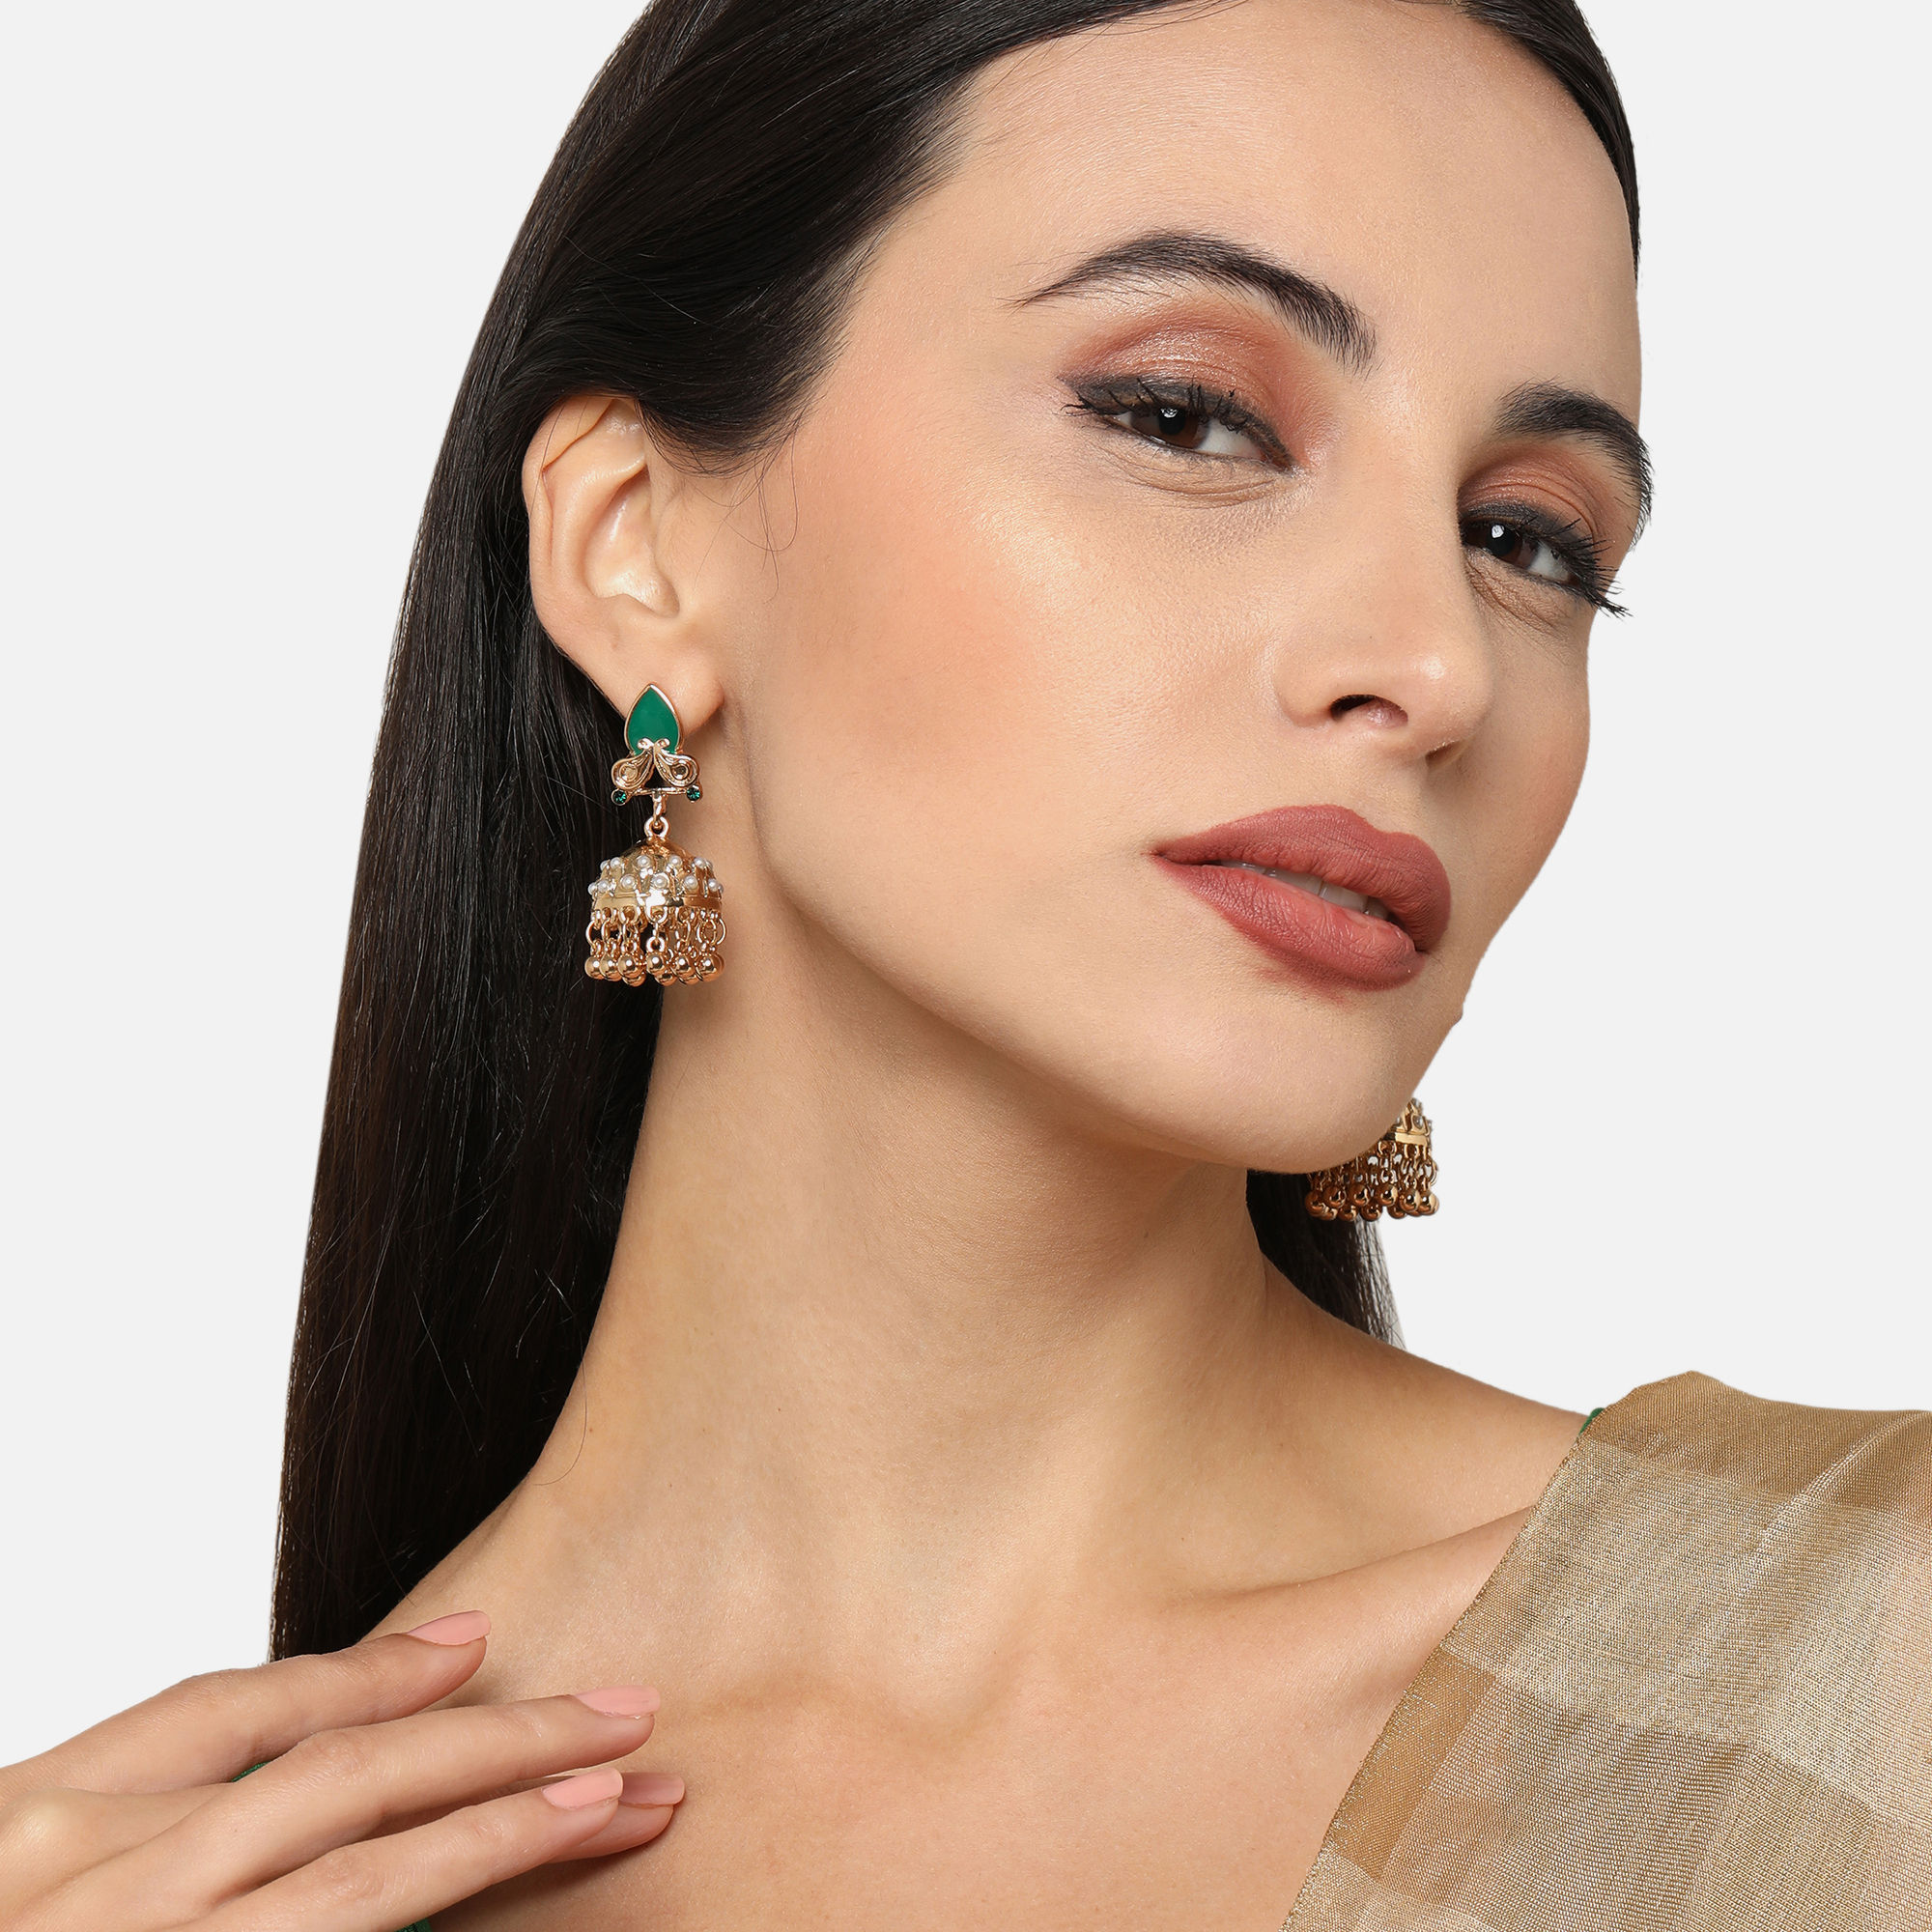 Accessorize London Womens Green Enamel Gold Earring Buy Accessorize  London Womens Green Enamel Gold Earring Online at Best Price in India   Nykaa